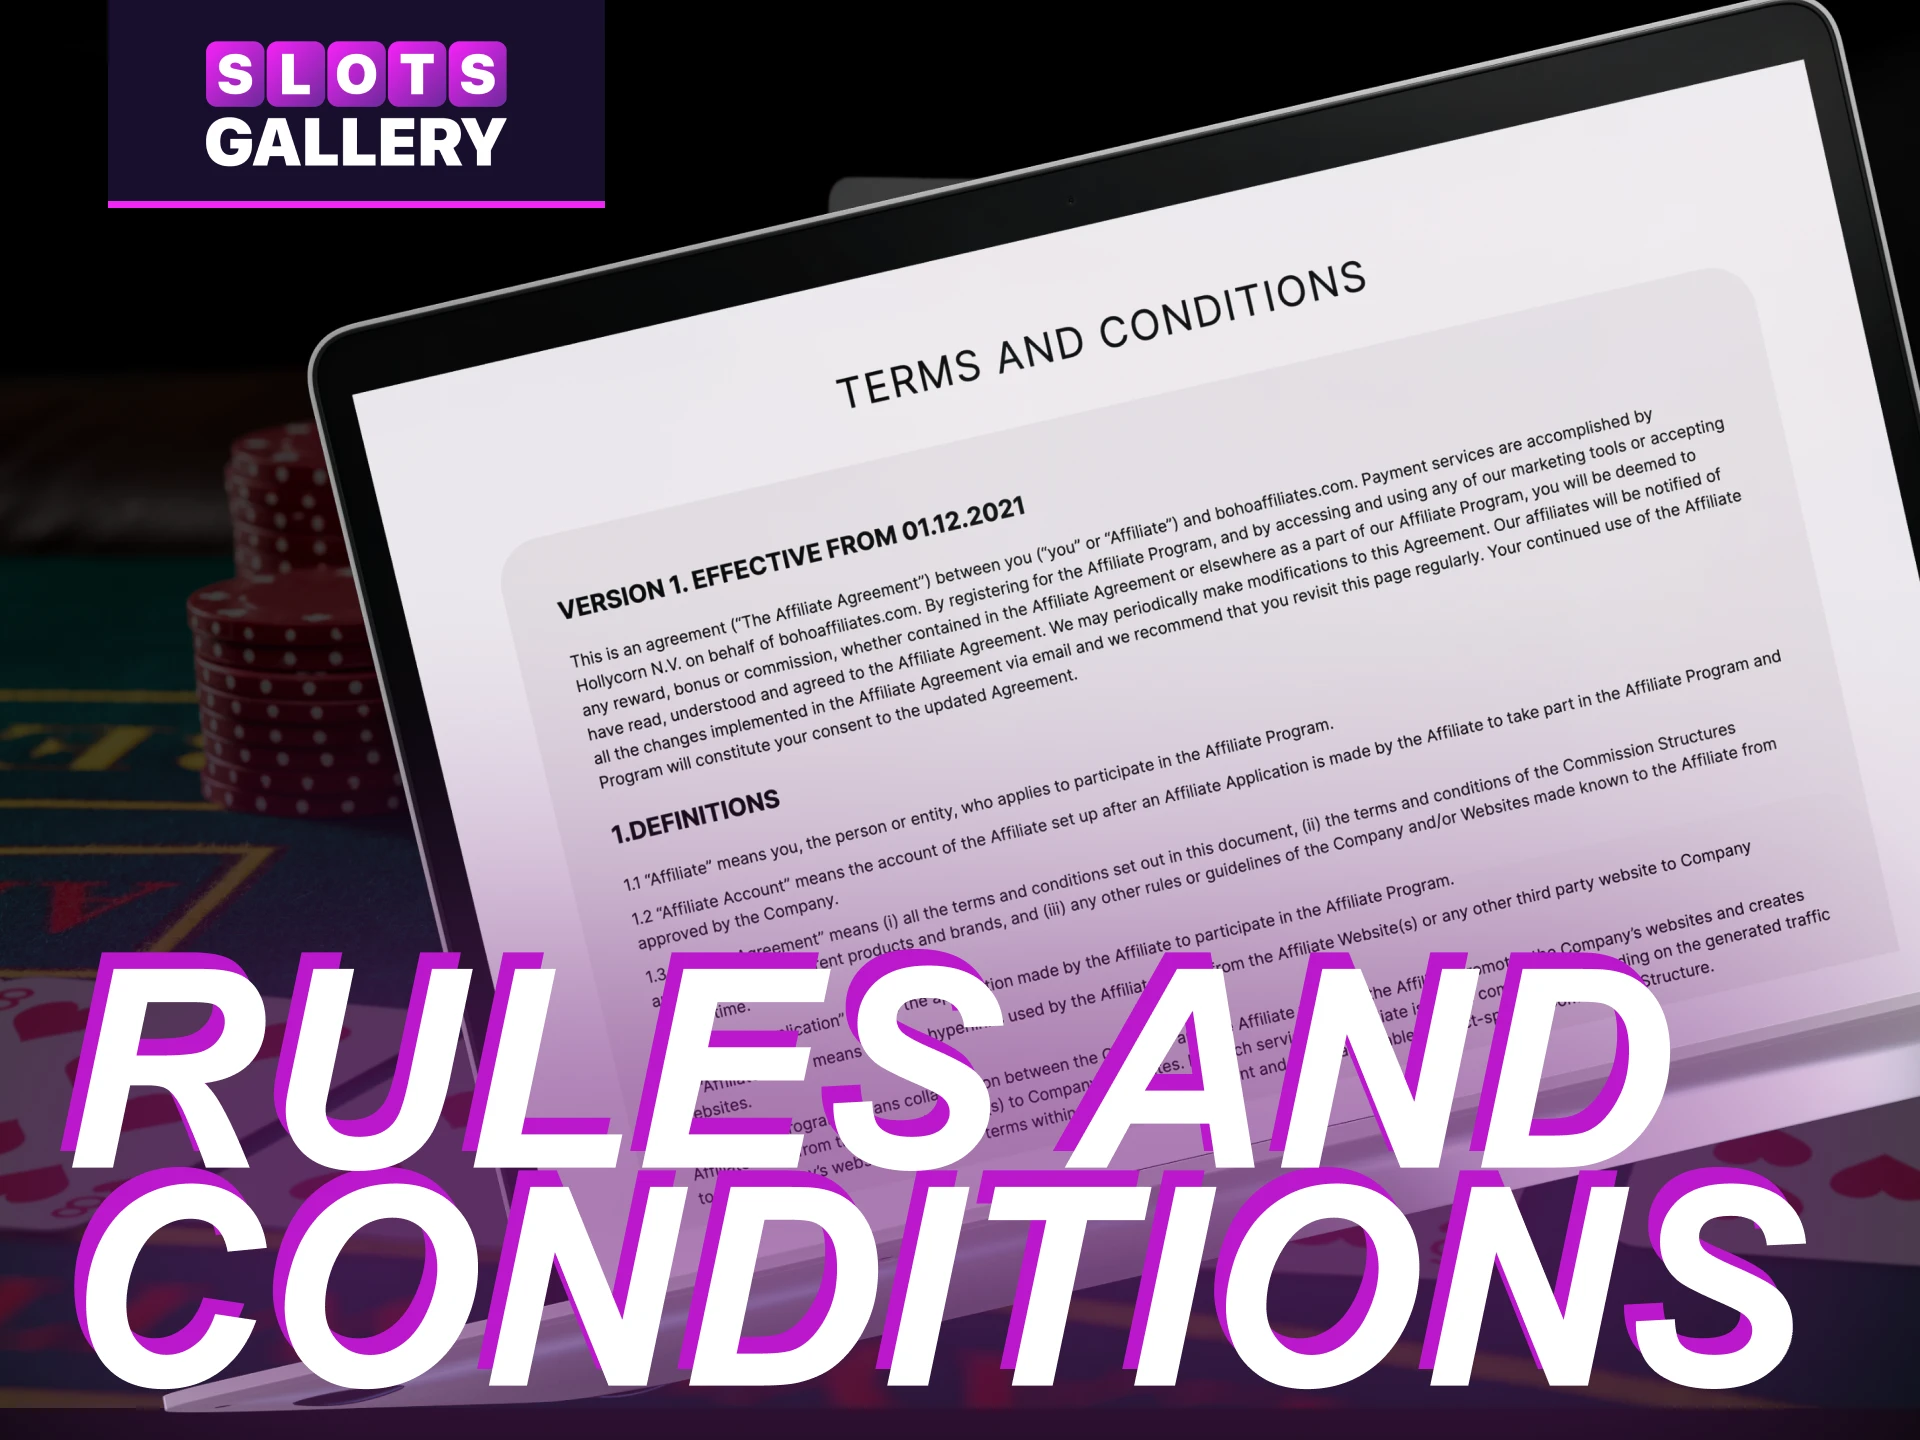 What are the rules and conditions for participation in the affiliate program of the Slots Gallery online casino.